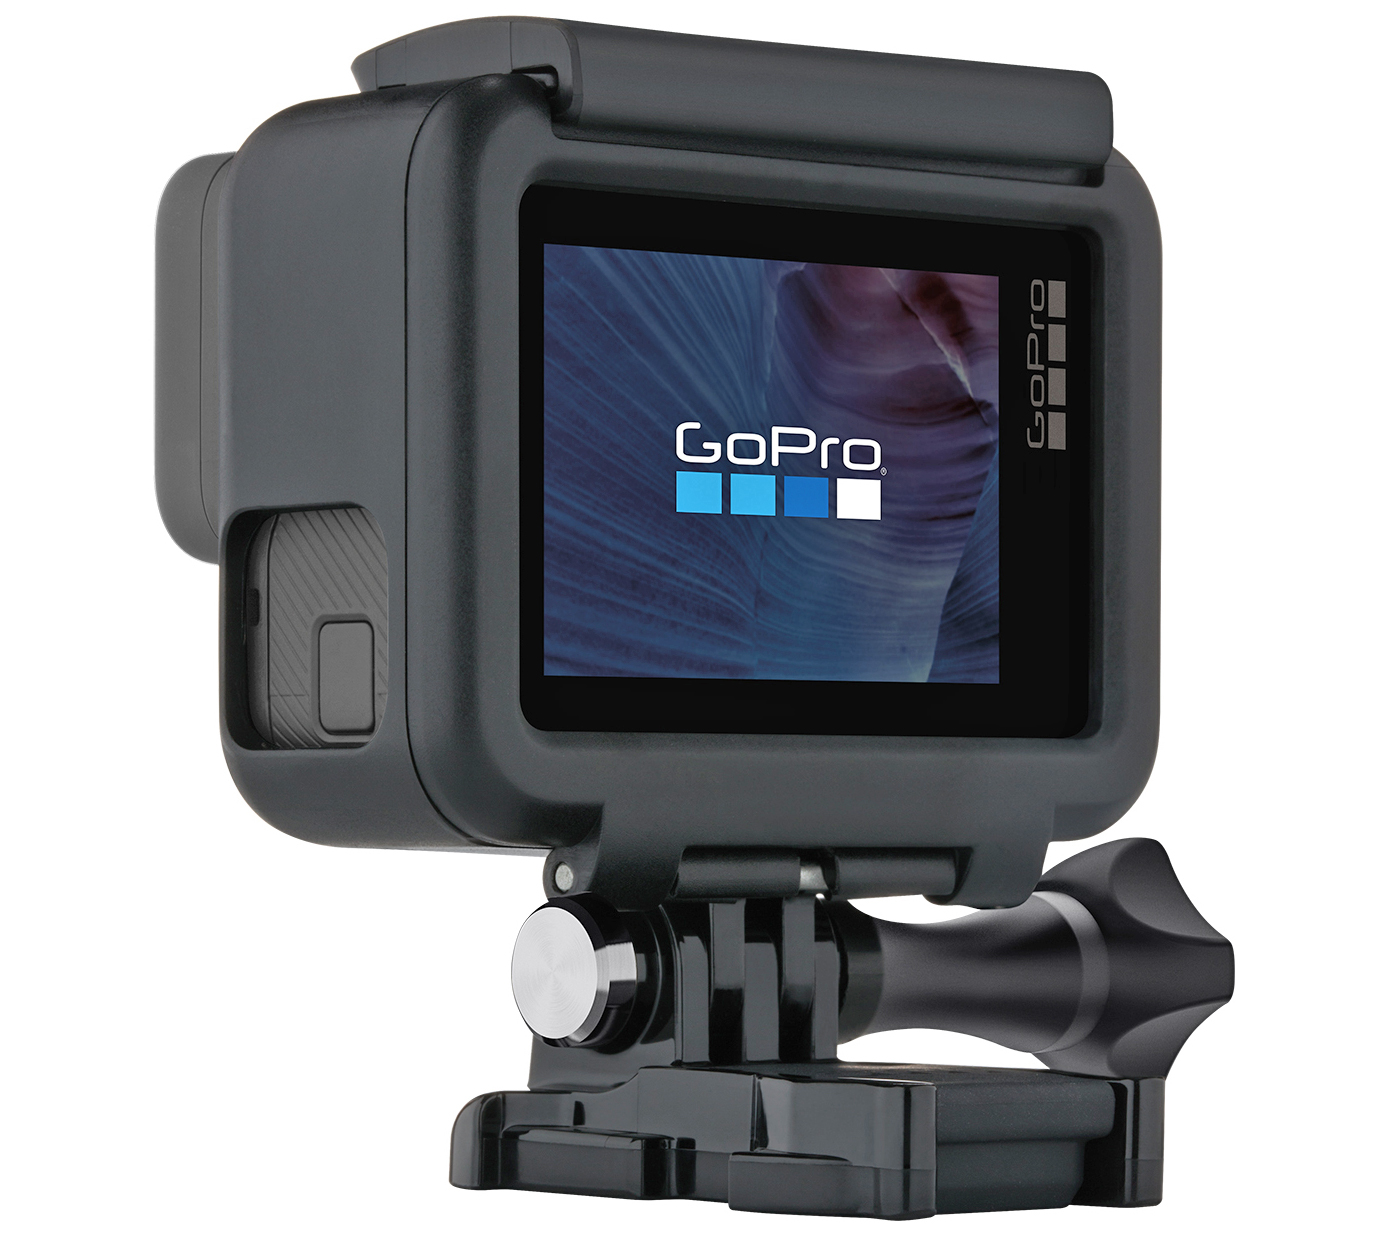 The GoPro Hero5 Is Finally Waterproof And Listens To Your Voice Commands